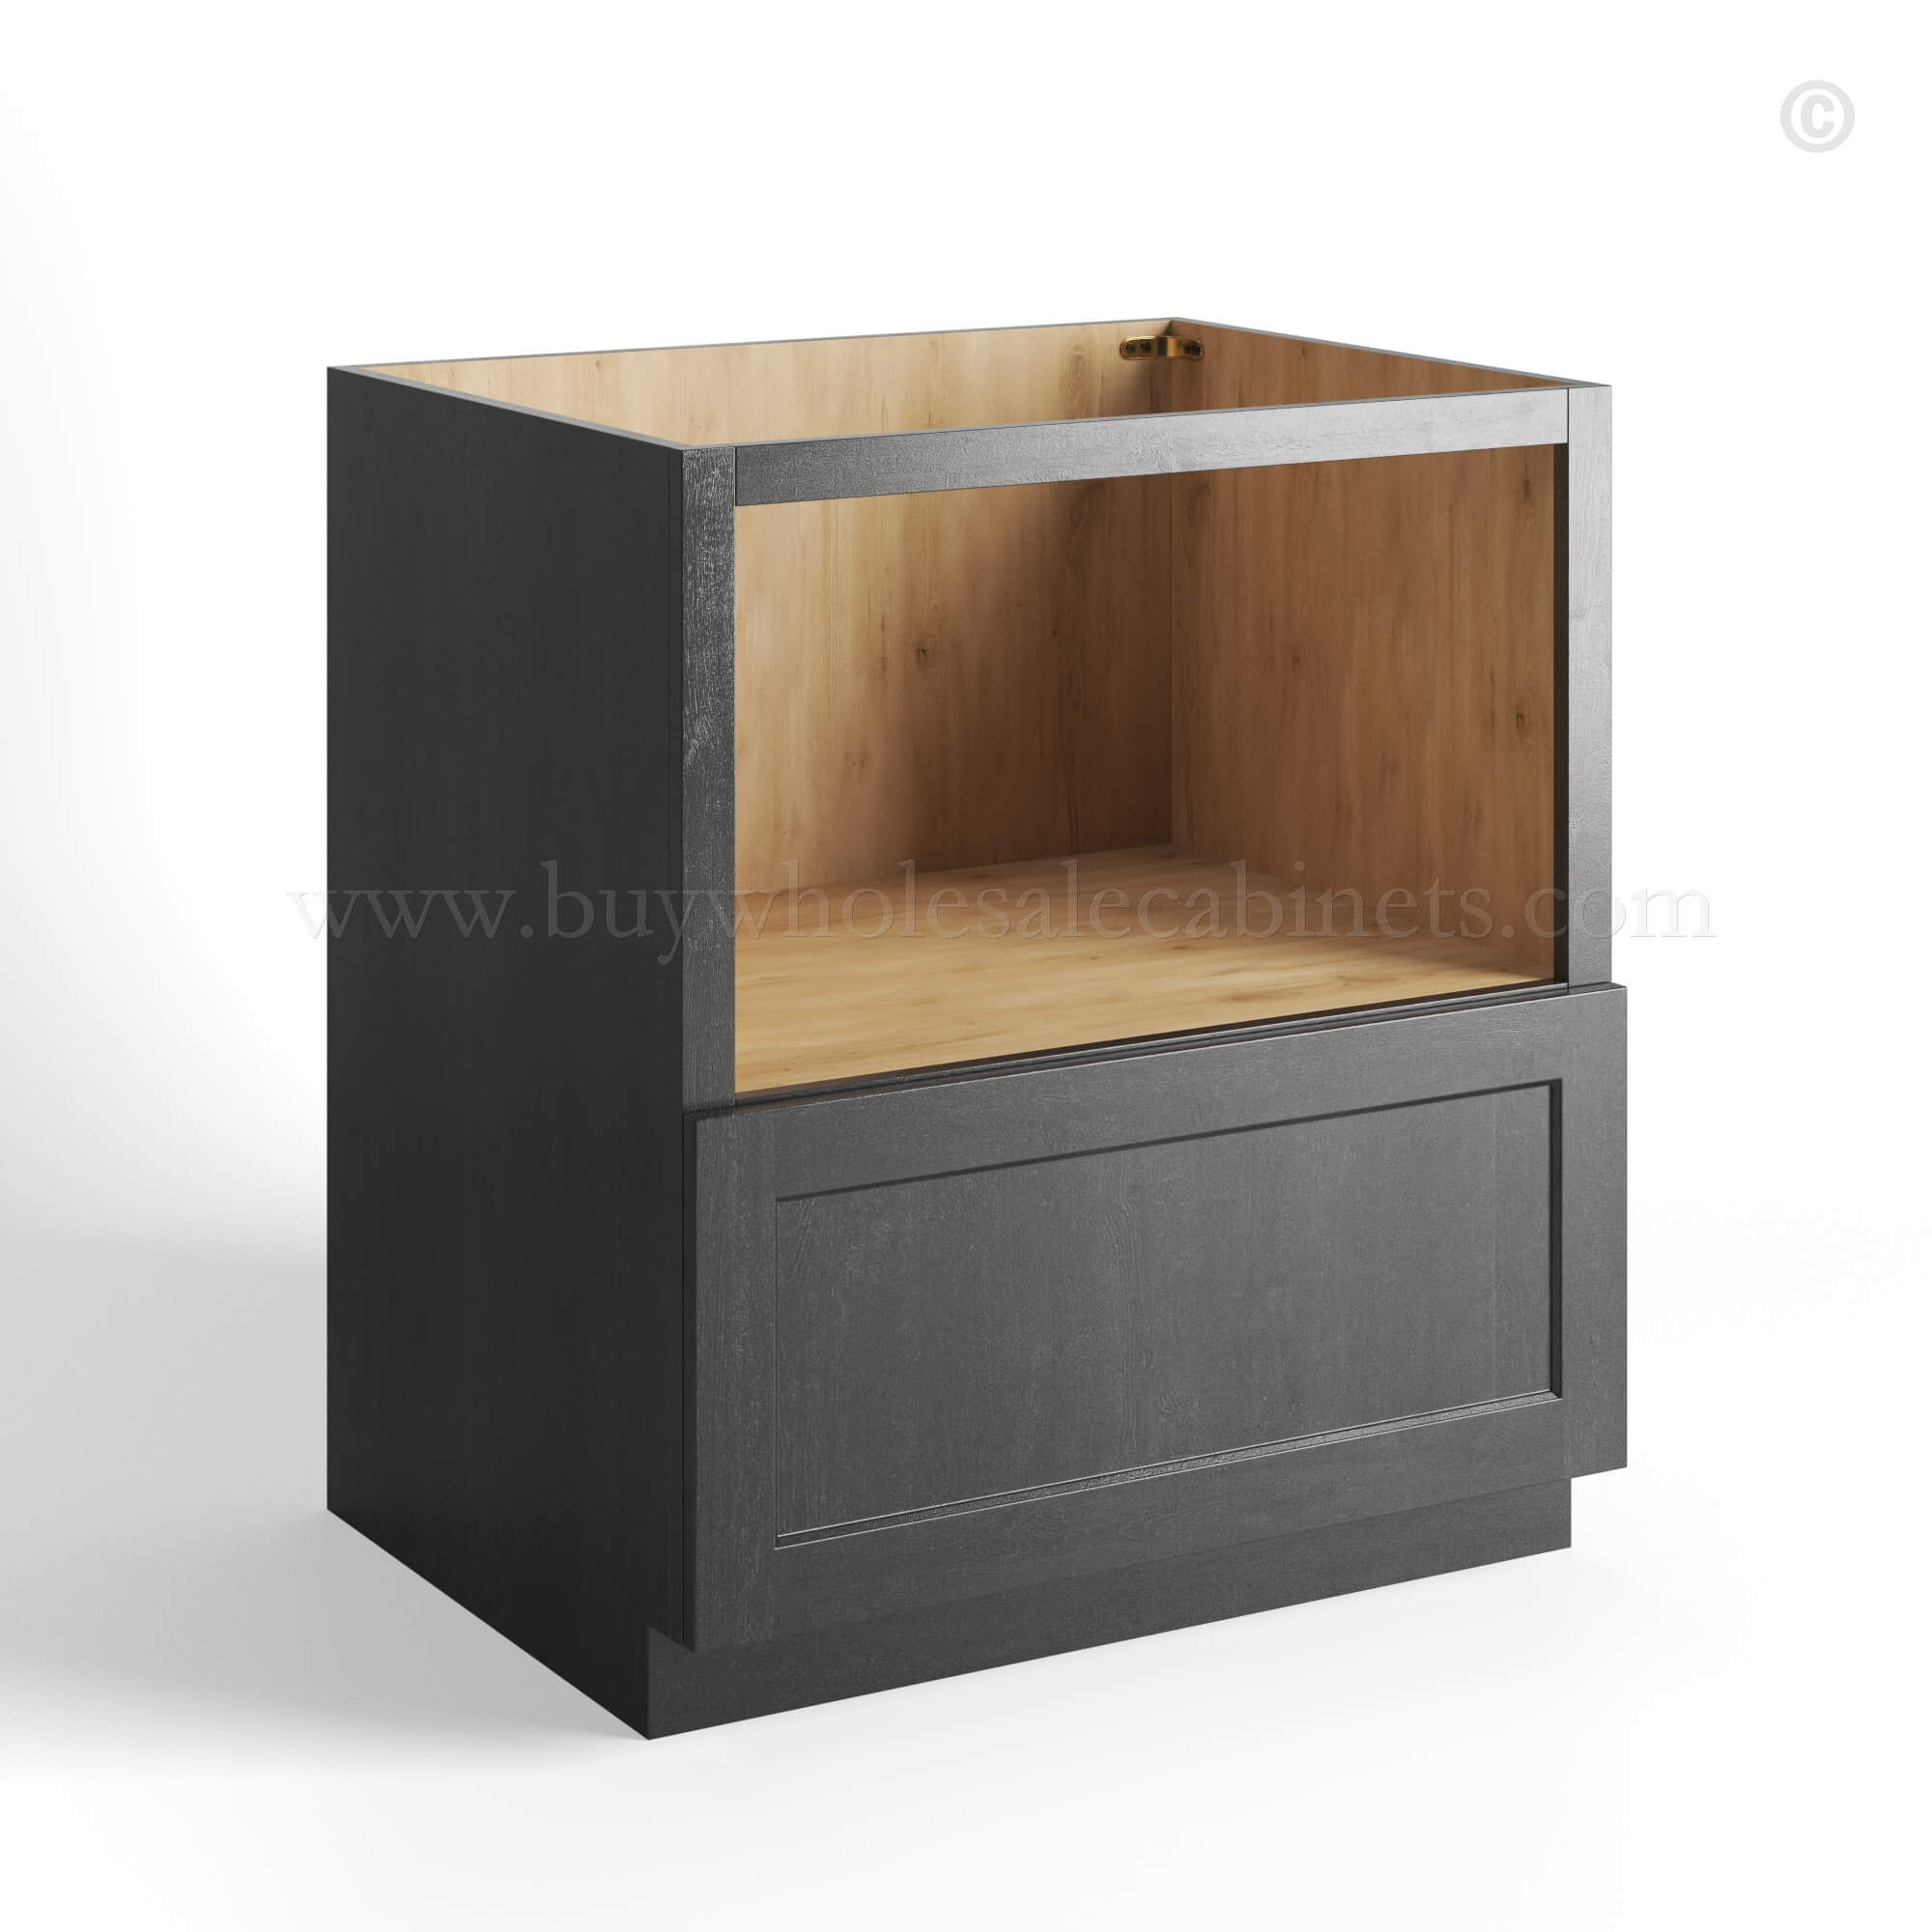 charcoal black shaker base microwave cabinet closed, rta cabinets, wholesale cabinets